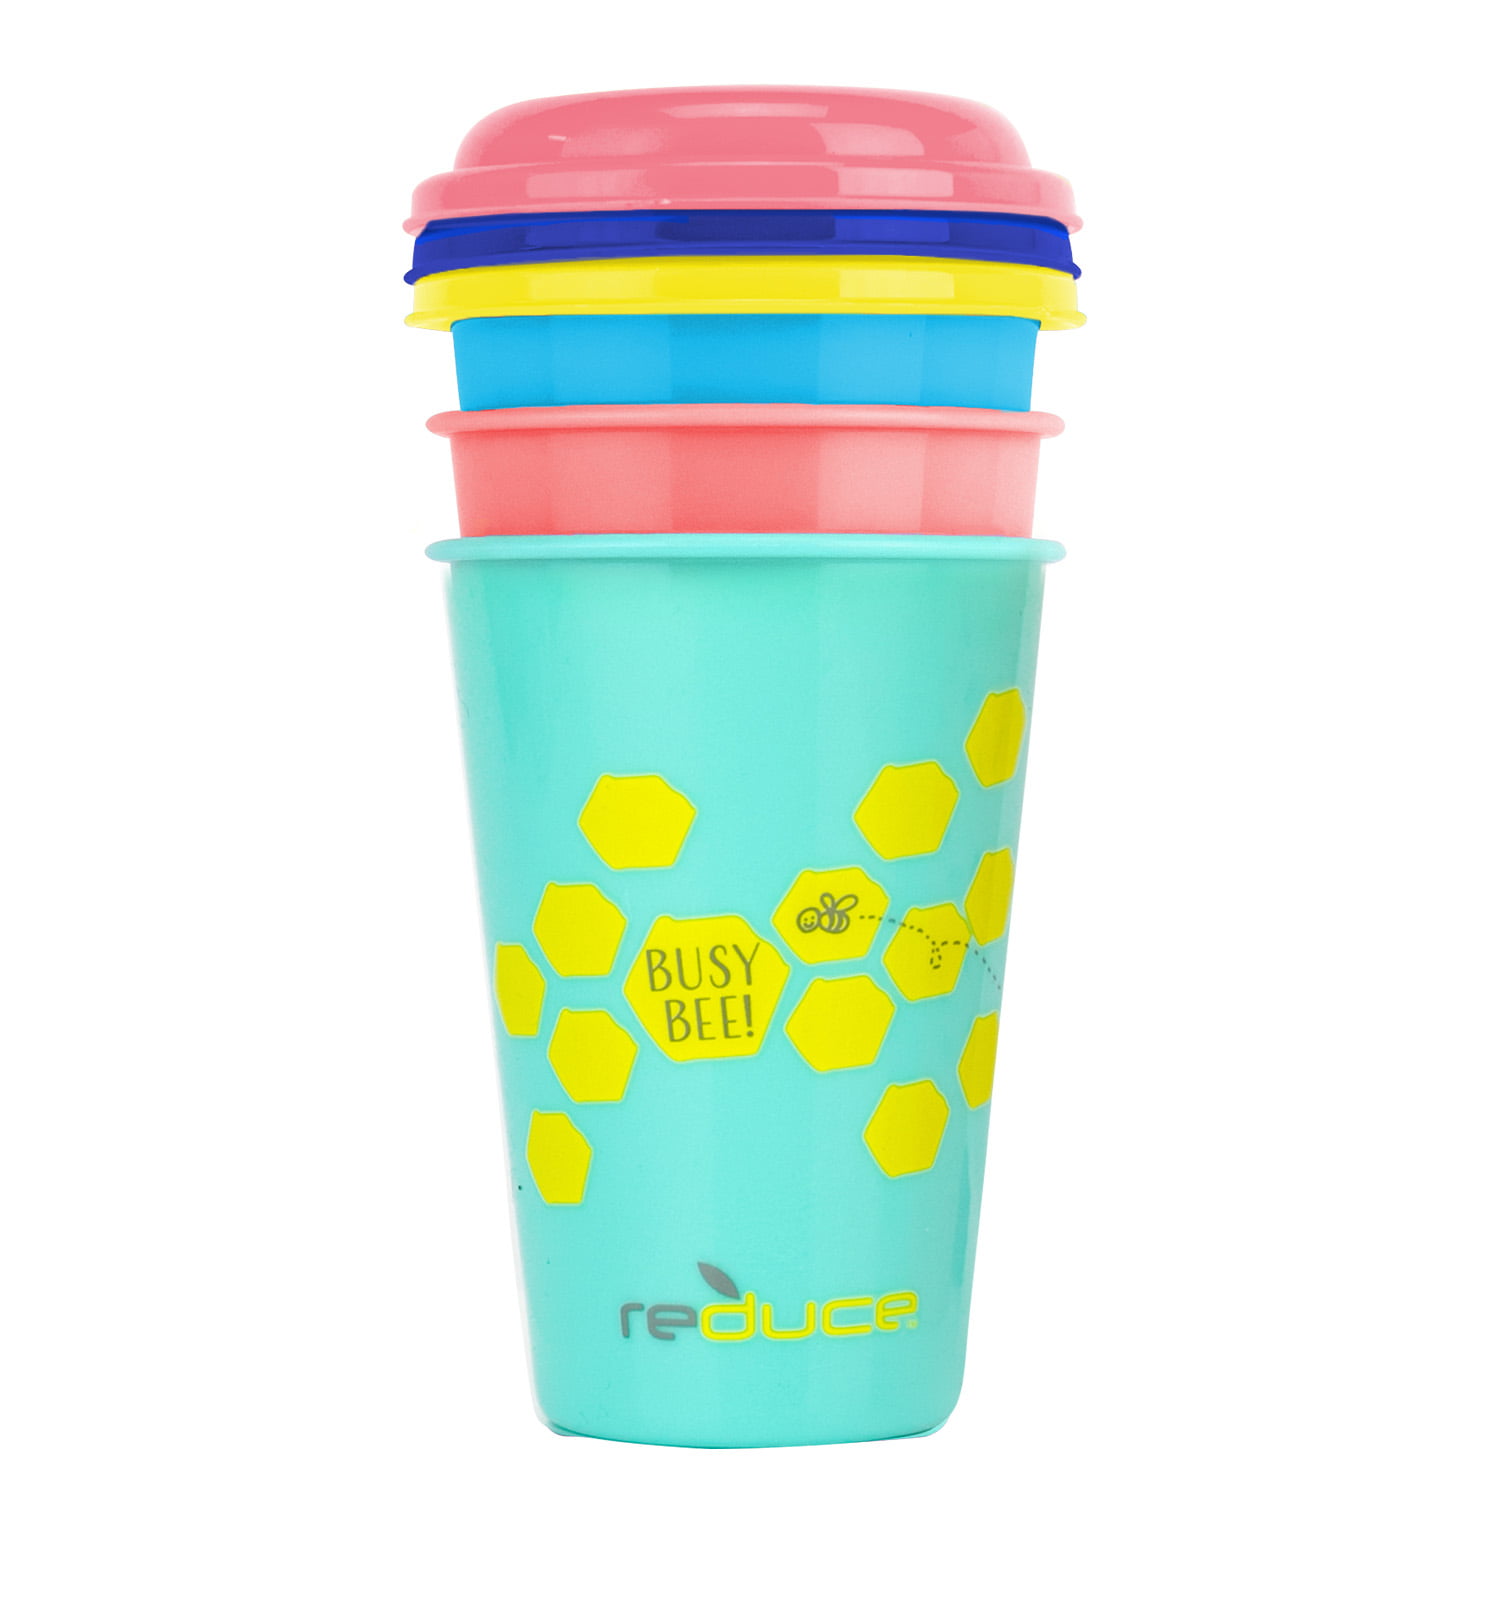 Reduce Gogo's 12 oz Kids Tumbler Set, 5 Pack Plastic Kids Cups with Straws and Lids Dishwasher Safe, BPA Free An Ideal Kids Smoothie Cup Mix and Match